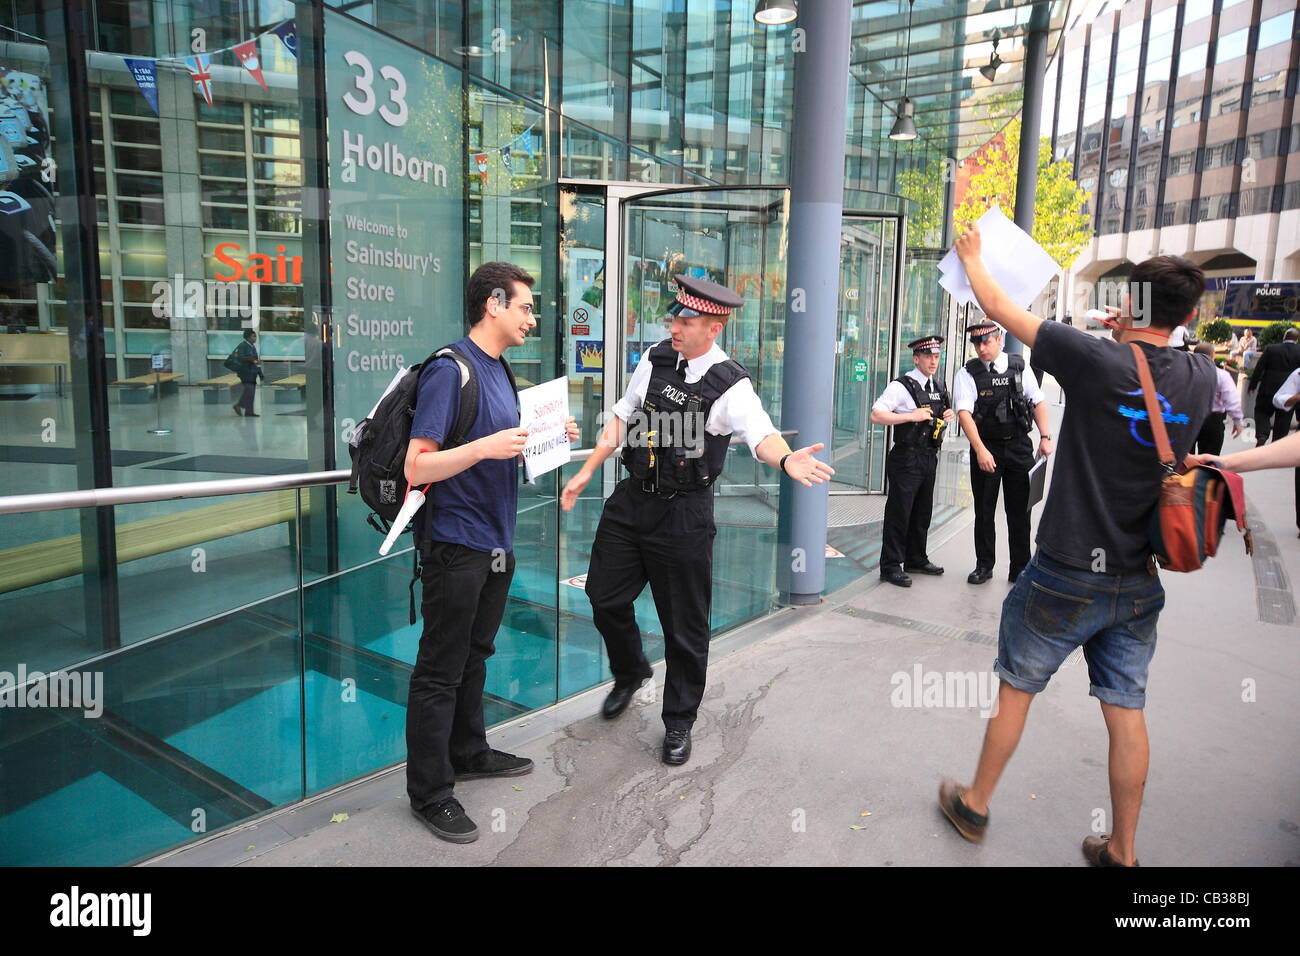 Monday 28th May 2012 Pay Up group target Sainsbury's head office as they call on the company to pay workers a living wage, Police move in to clear protesters from the property. Credit Line : Credit:  HOT SHOTS / Alamy Live News Stock Photo